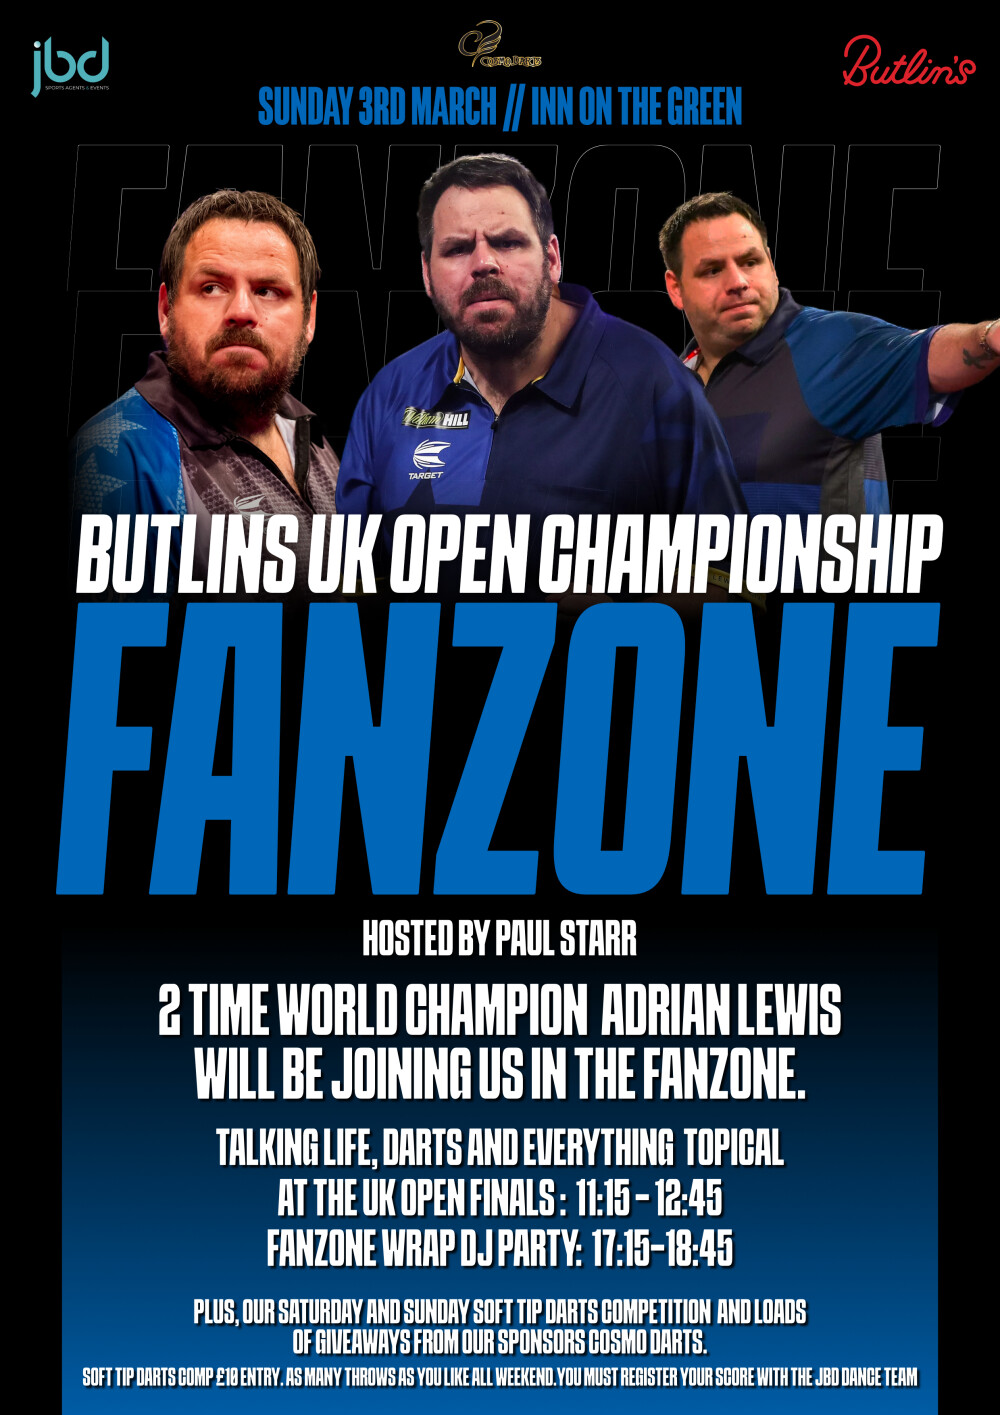 Butlins UK Open Championship Fanzone with Adrian 'Jackpot' Lewis